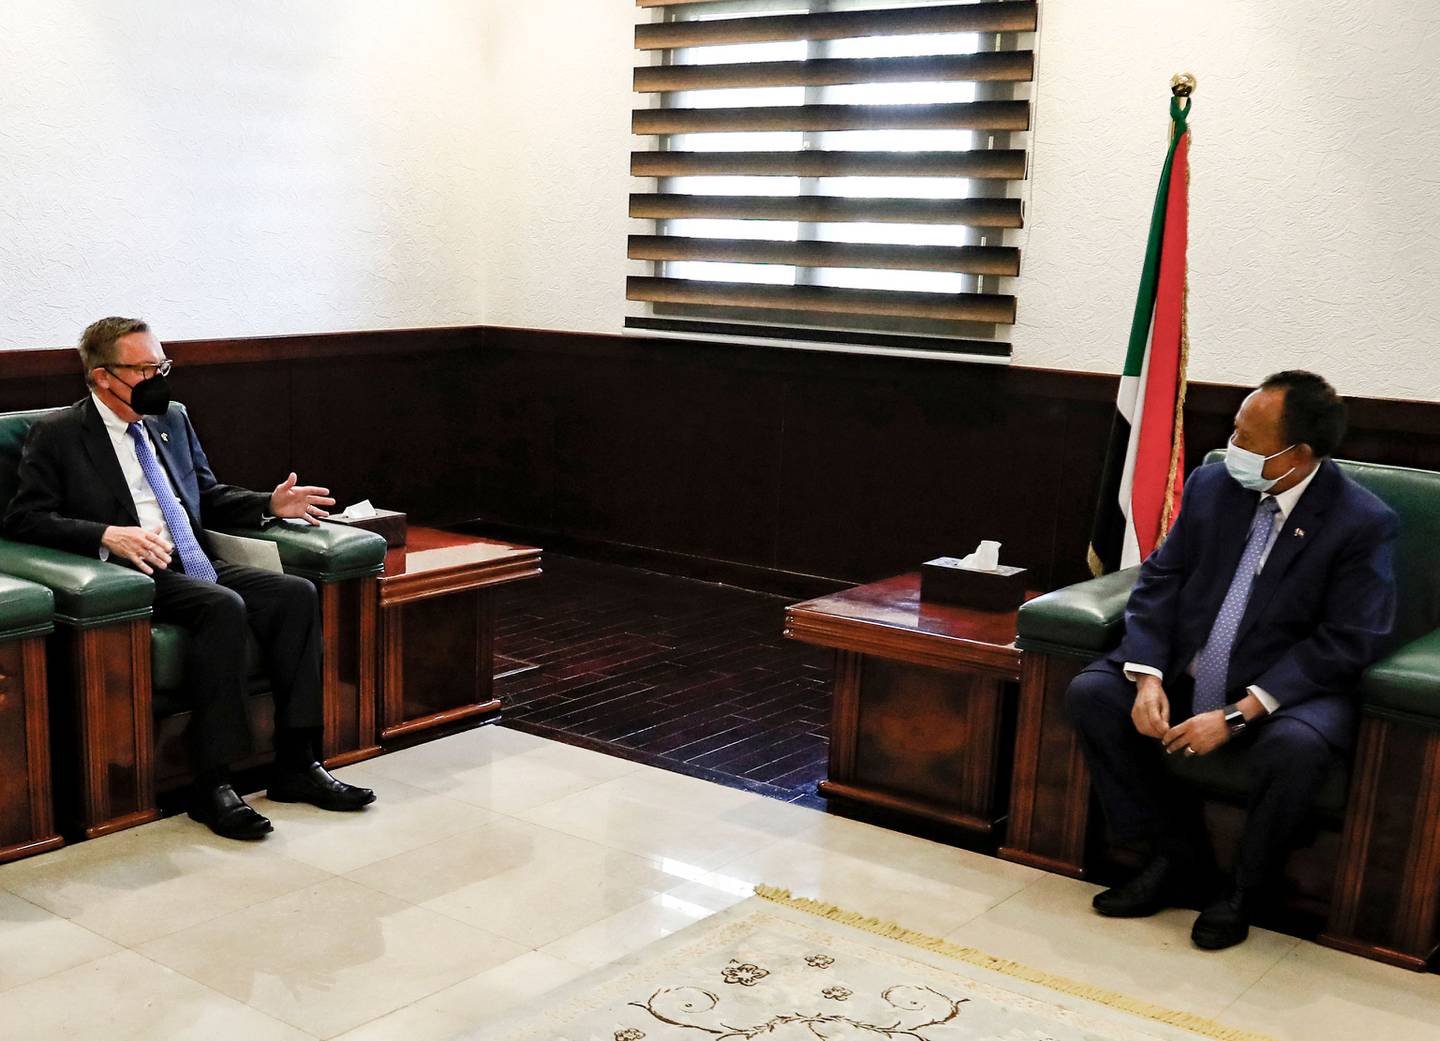 Sudan's Prime Minister Abdalla Hamdok (R) meets with the US Special Envoy for the Horn of Africa Jeffrey Feltman in the capital Khartoum on September 29, 2021. AFP